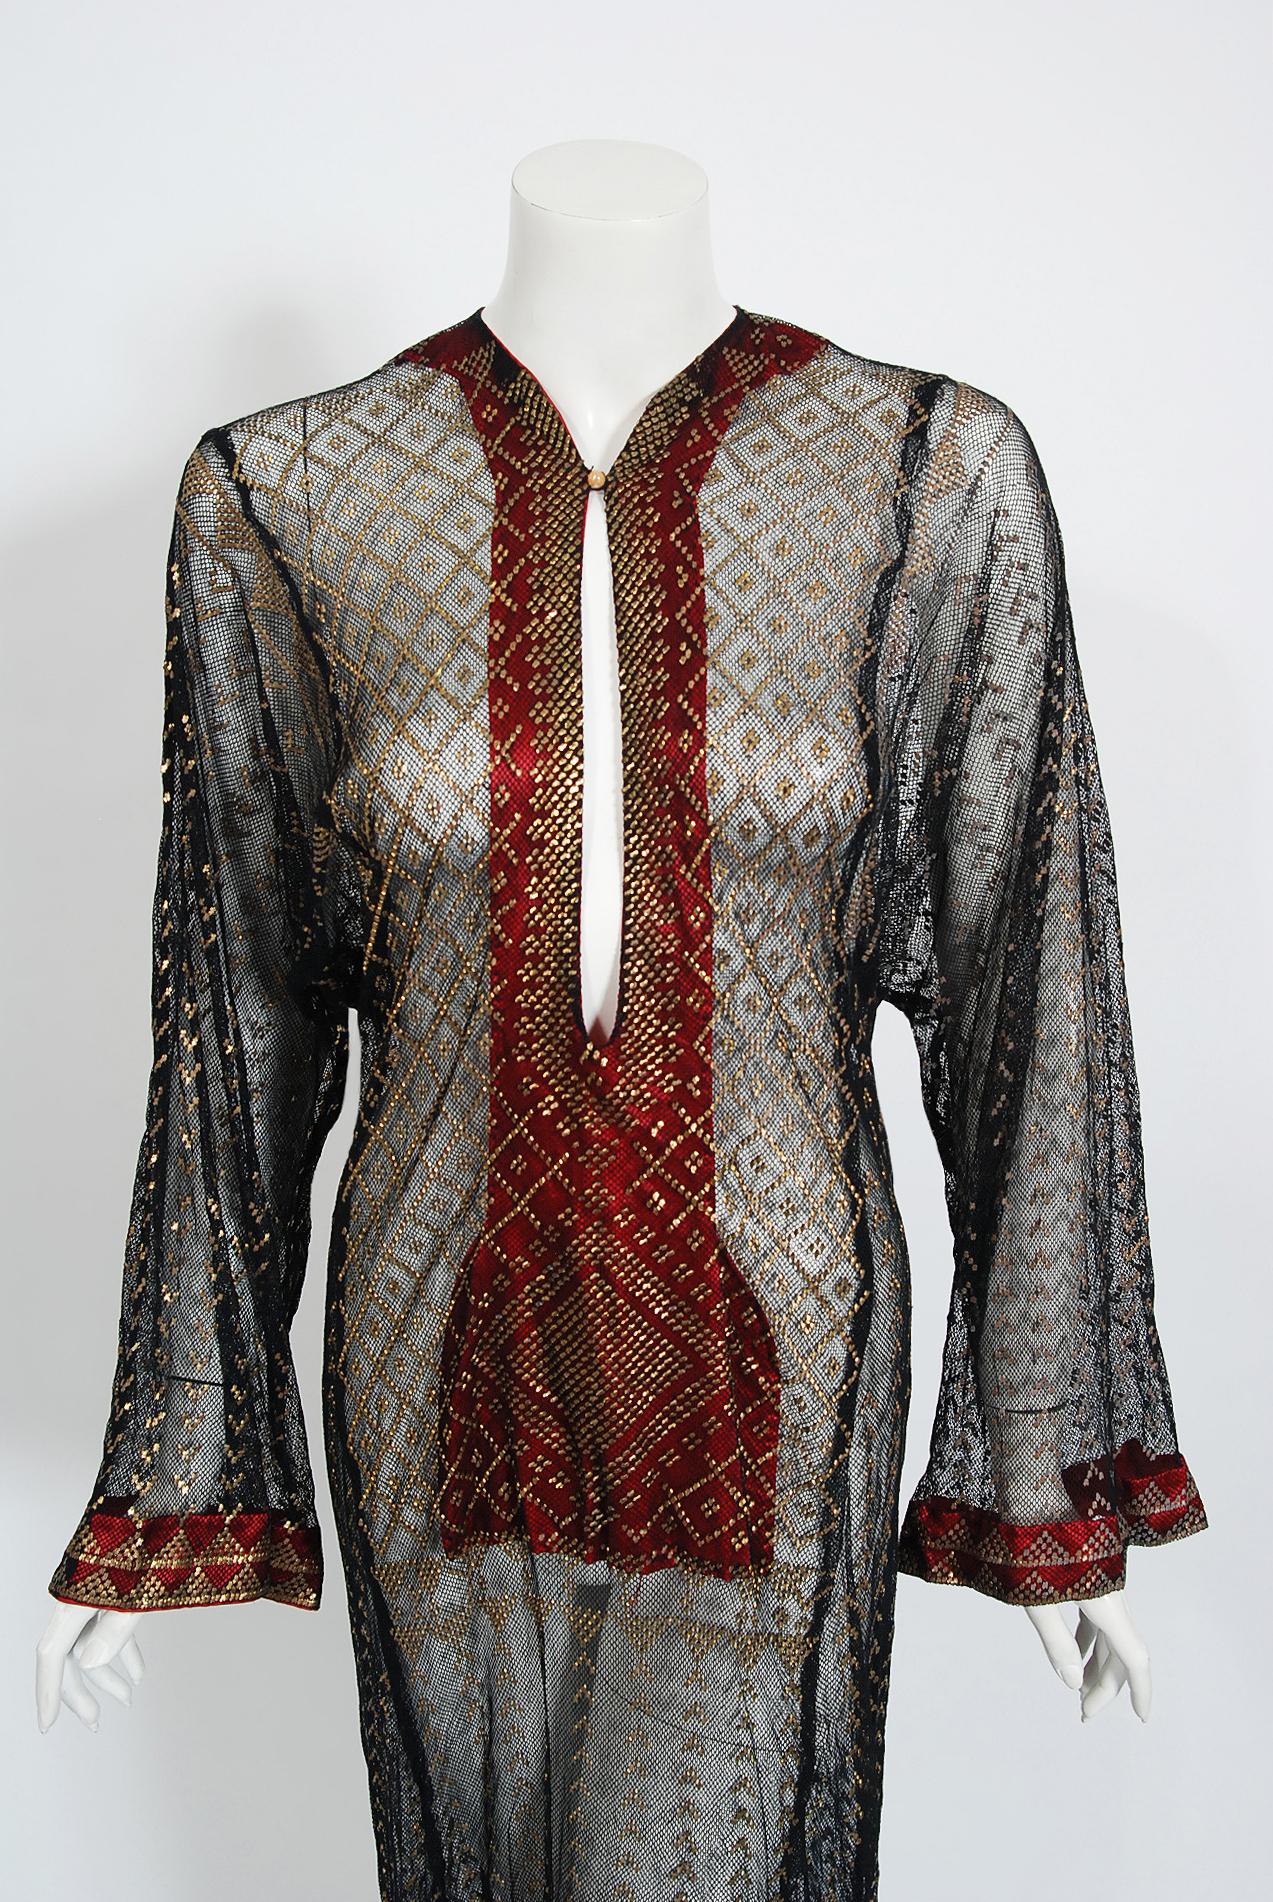 A fantastic museum-quality Egyptian assuit hammered metal cotton-net dress dating back to the early 1930's. Egyptian fashion was all the rage during the 1920's and 1930's with the discovery of King Tut's tomb. Garments made out of this fabric was